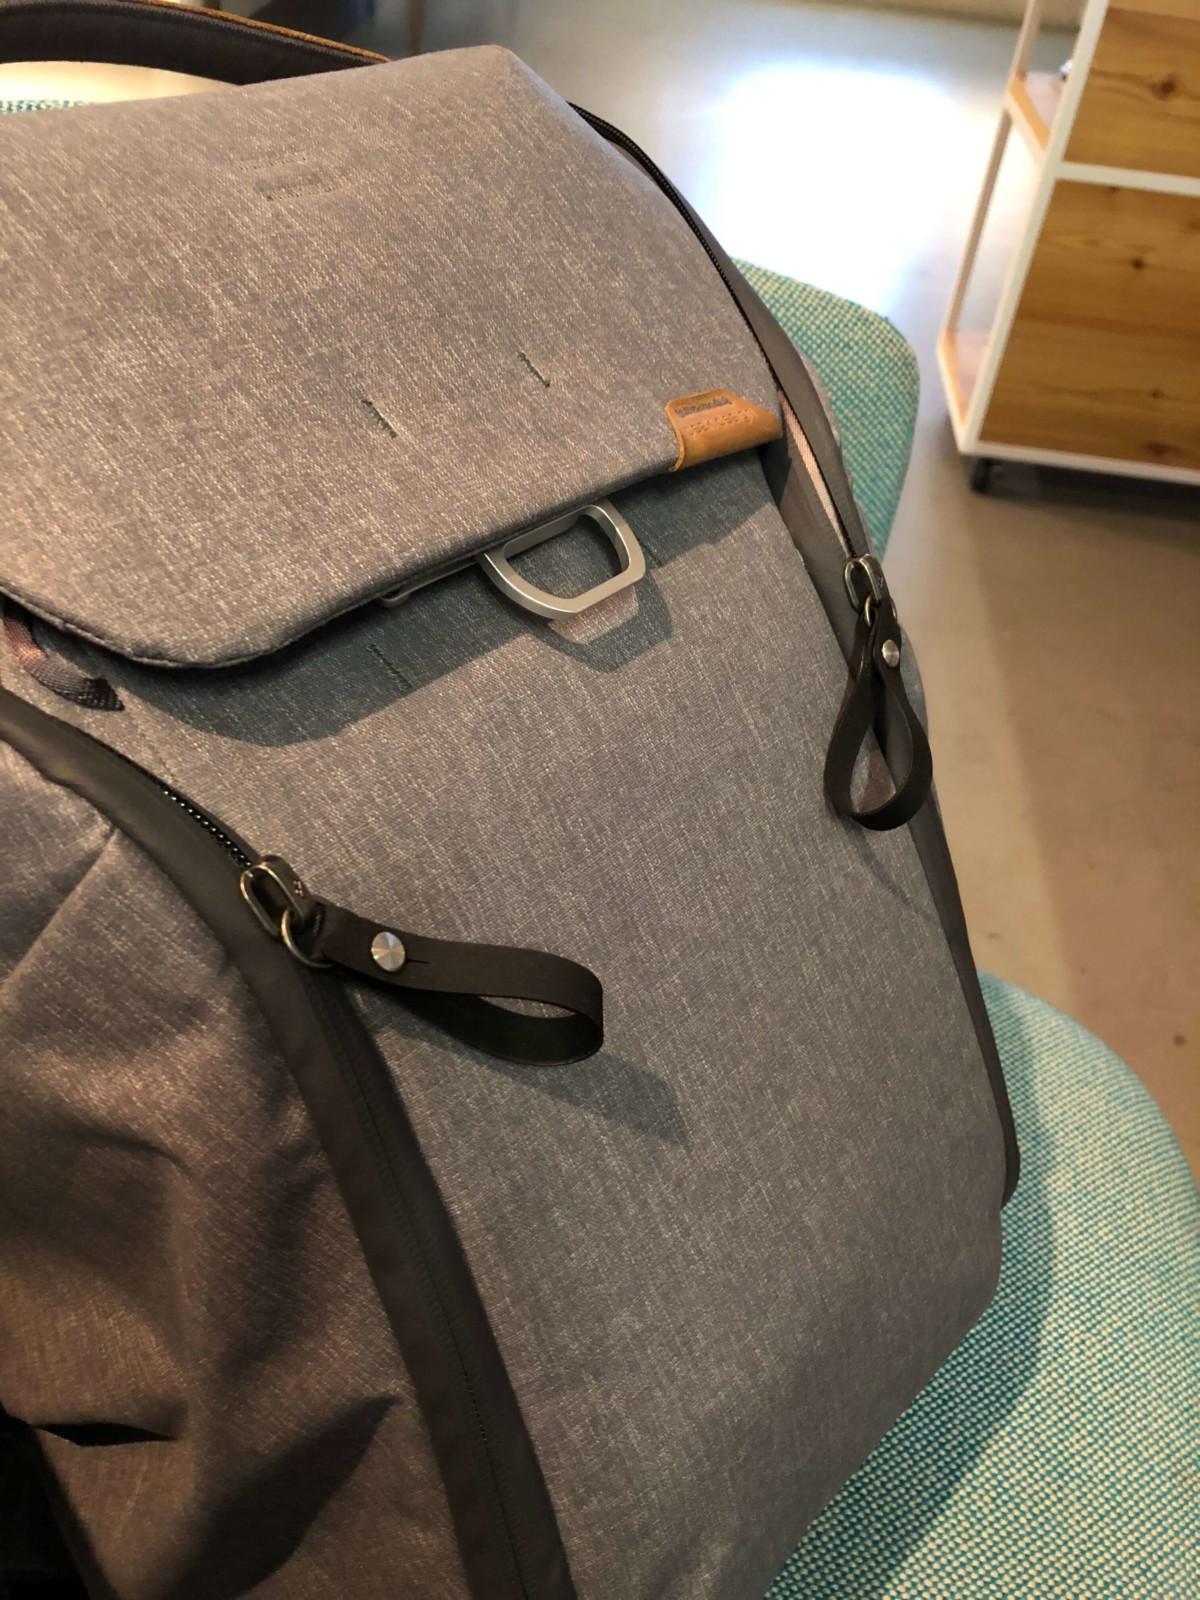 The Peak Design Everyday Backpack zippers are great